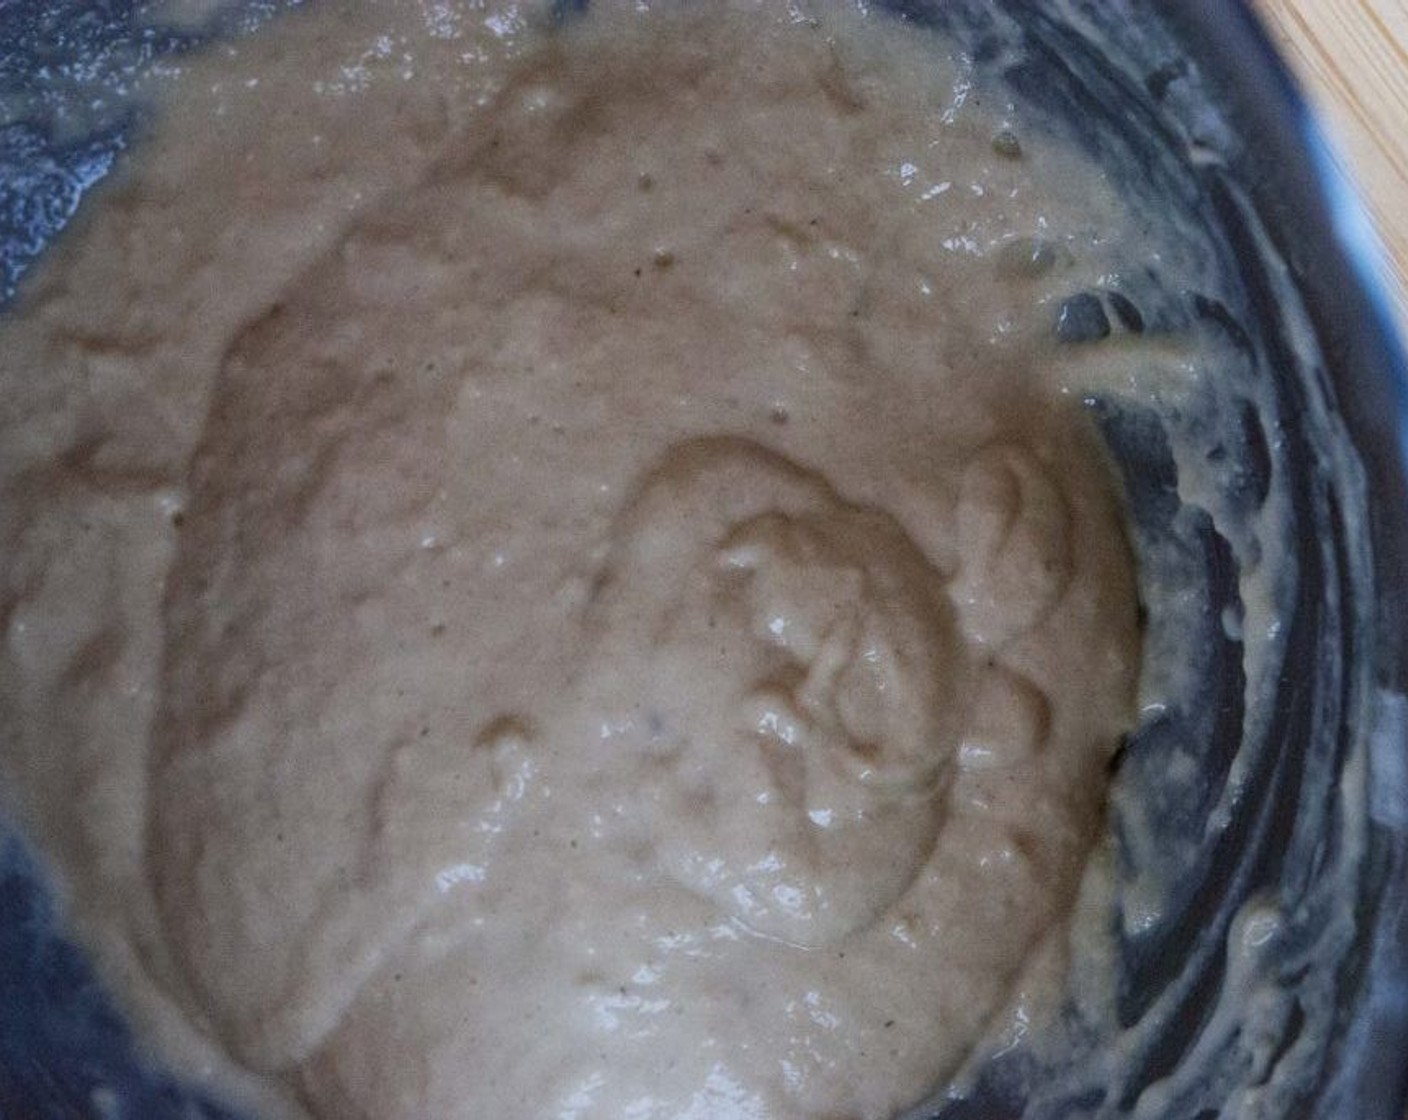 step 1 In a bowl, dissolve Active Dry Yeast (2 Tbsp) and Granulated Sugar (1 Tbsp) into the Kefir Whey (1/3 cup), then stir in a part of the Bread Flour (1 cup).